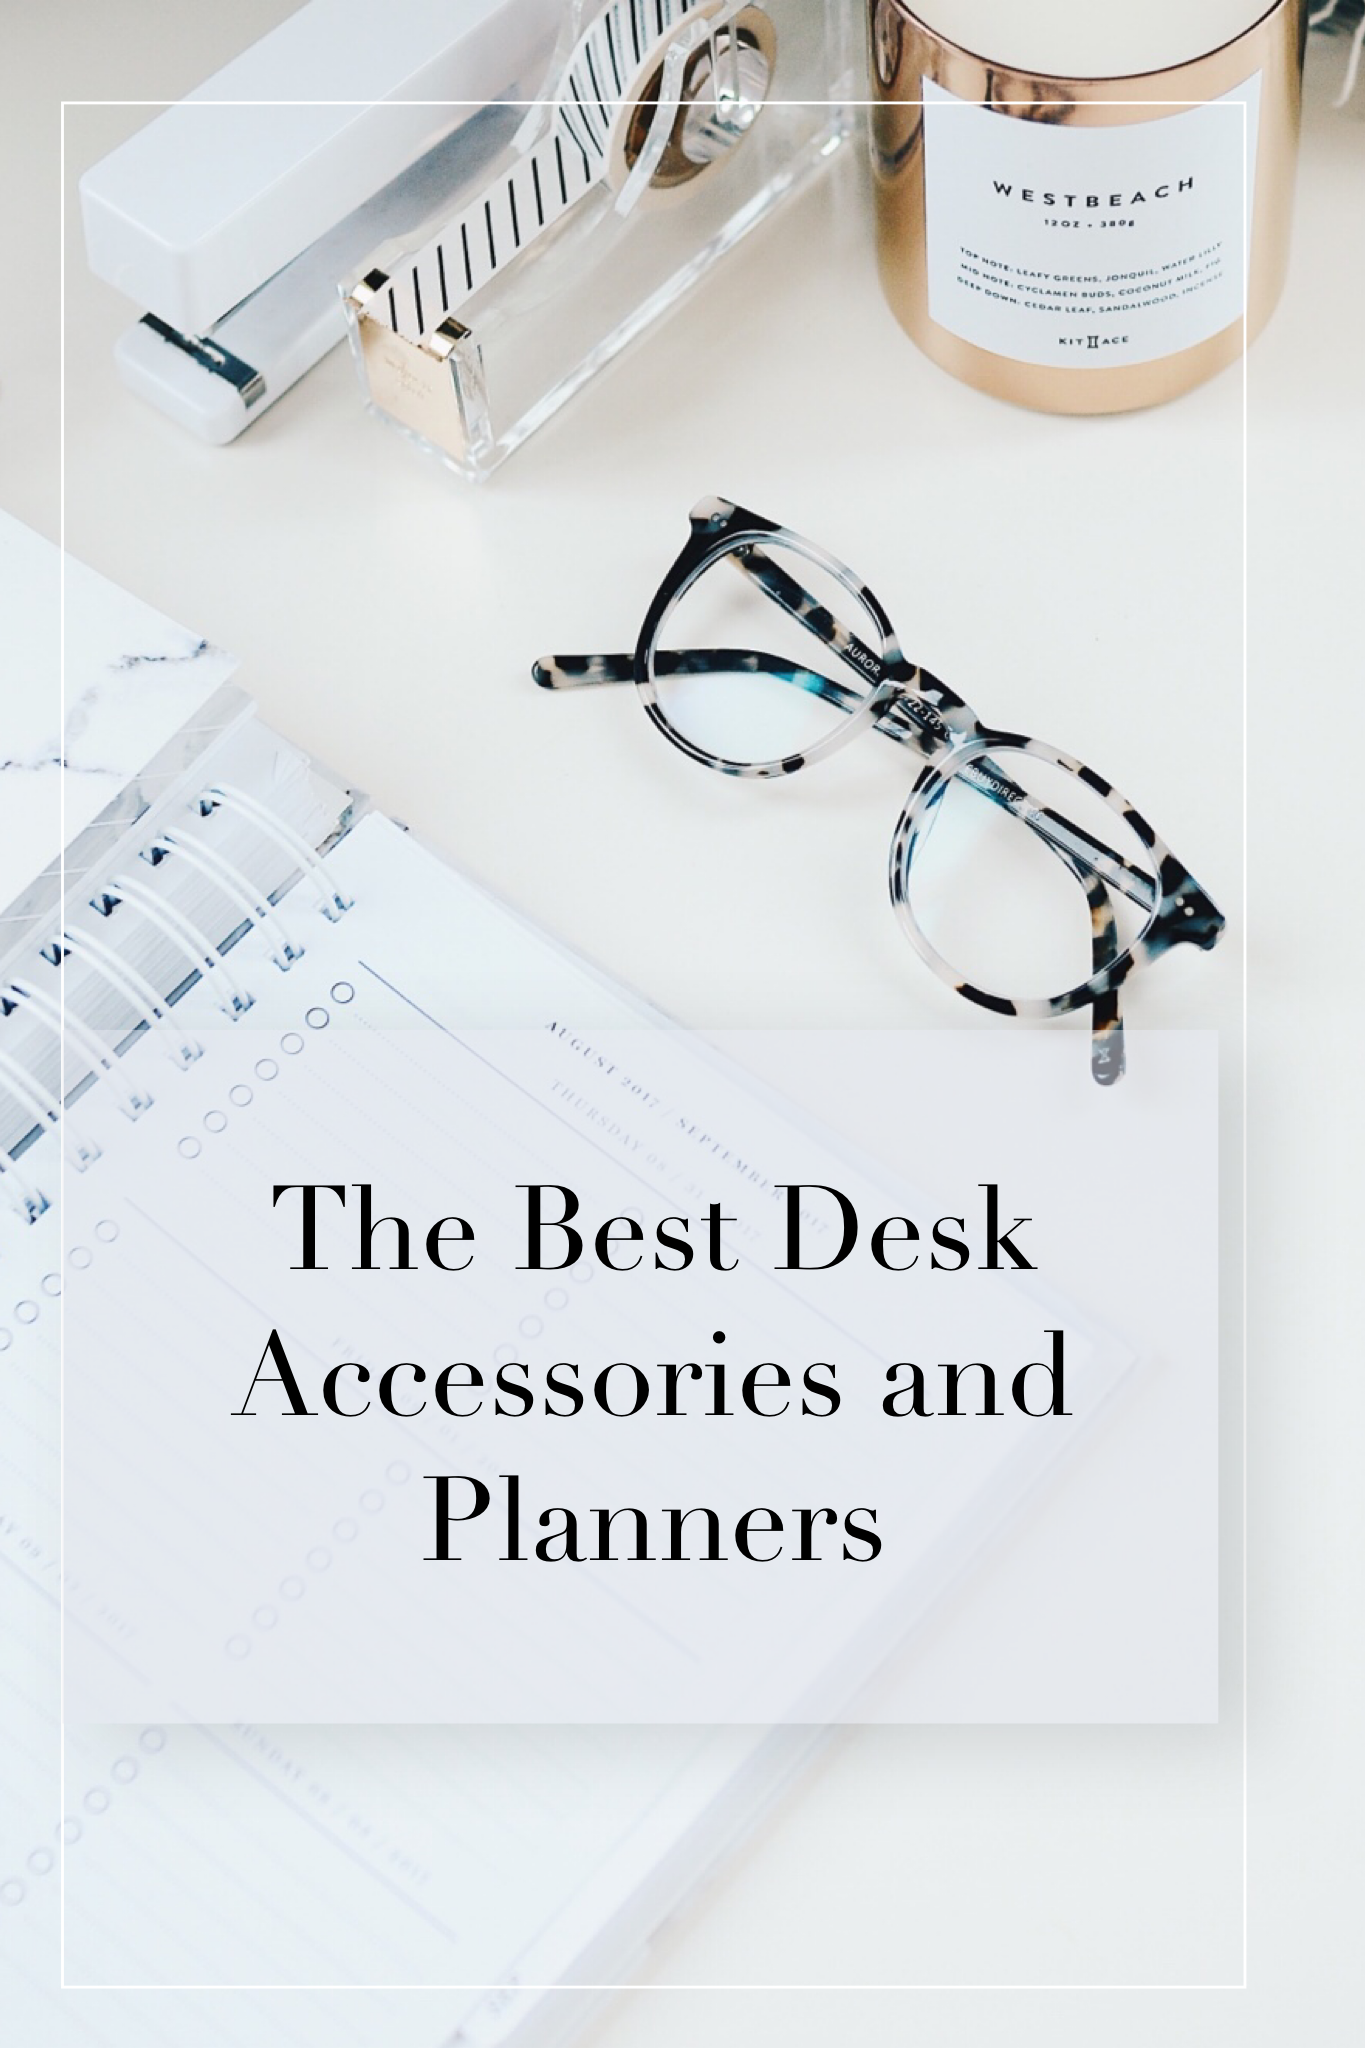 Rounding up some of the Best Desk Accessories and Planners for 2020 on Ridgely's Radar plus a Free Download with the 6 Tips to a Clean and Organized Desk.